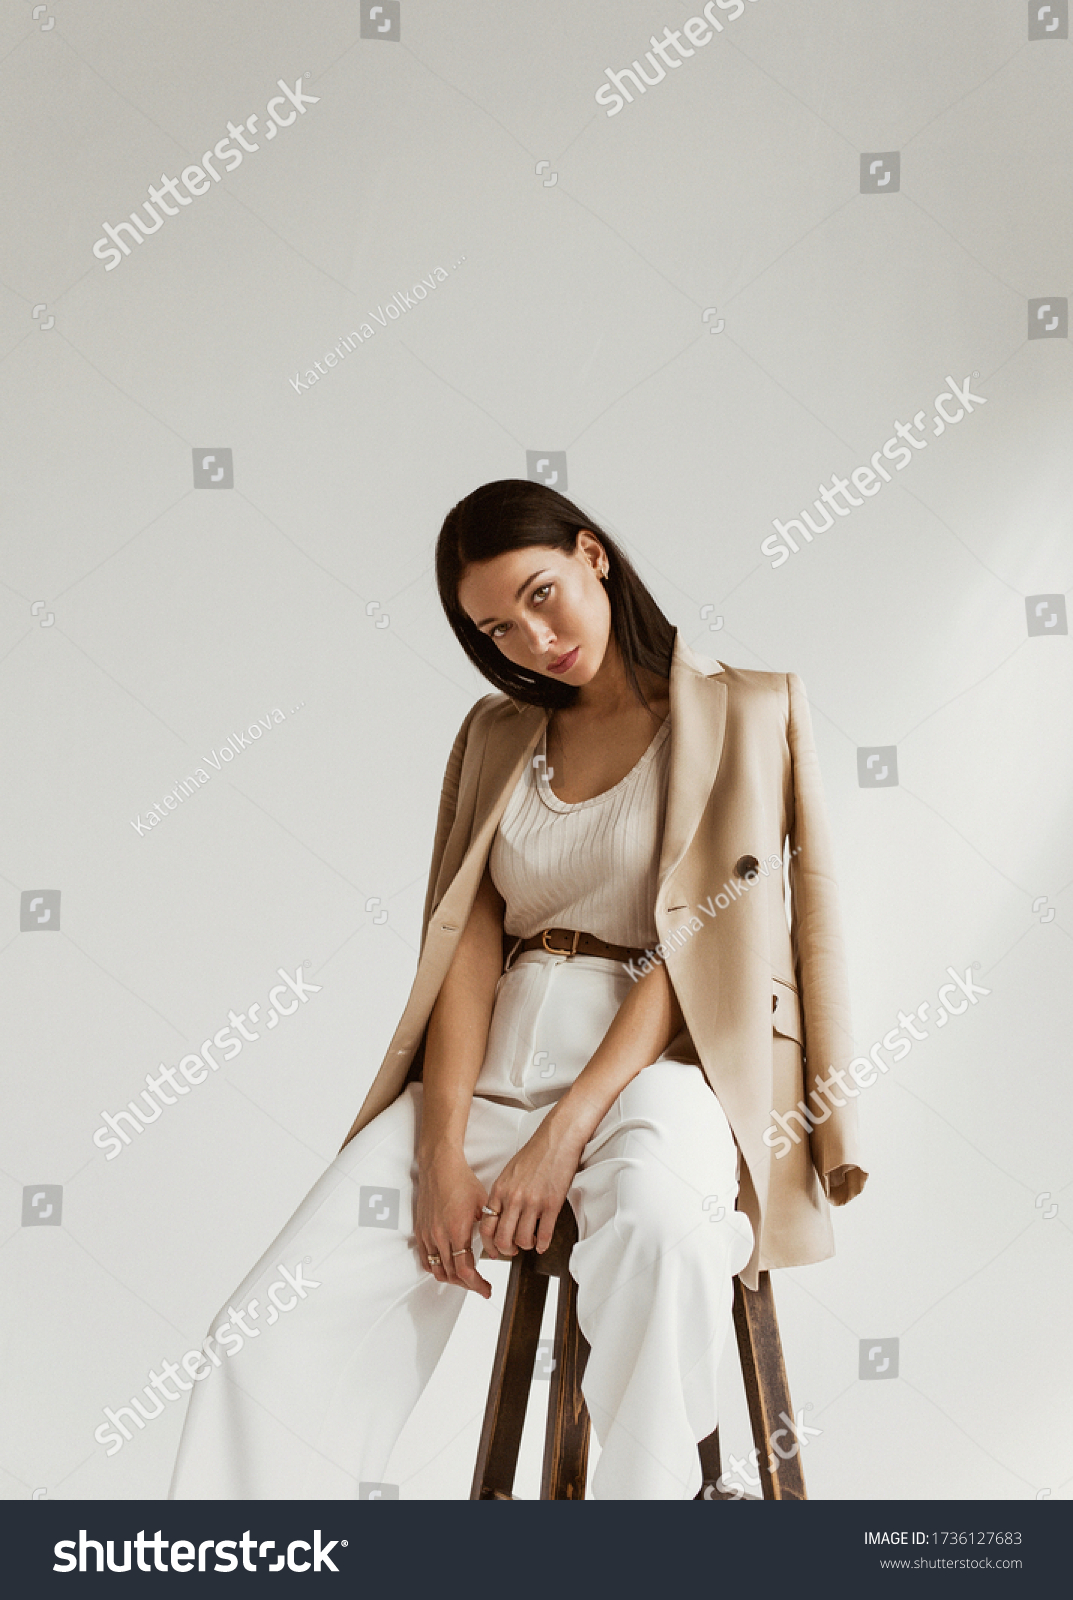 girl in a beige jacket fashion on a white background #1736127683